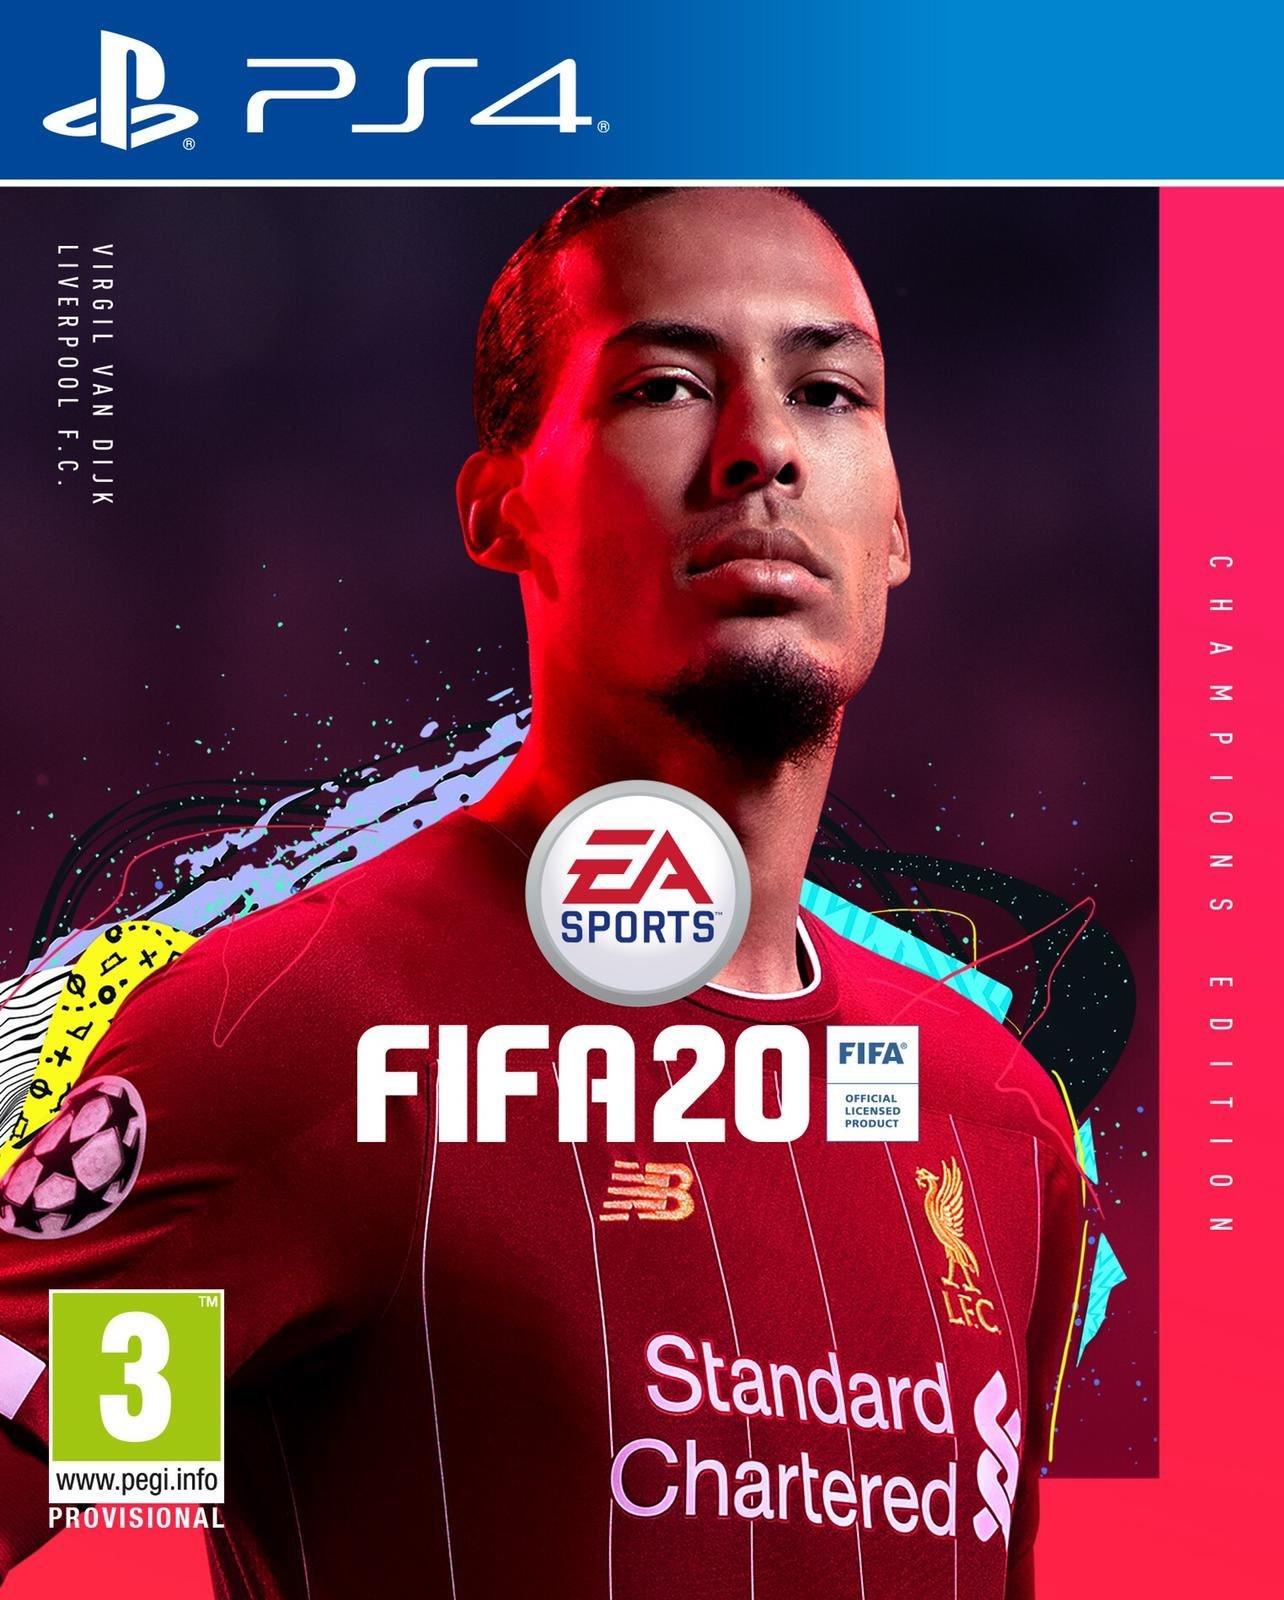 All Three FIFA 20 Cover Stars Revealed, Including An All Time Legend